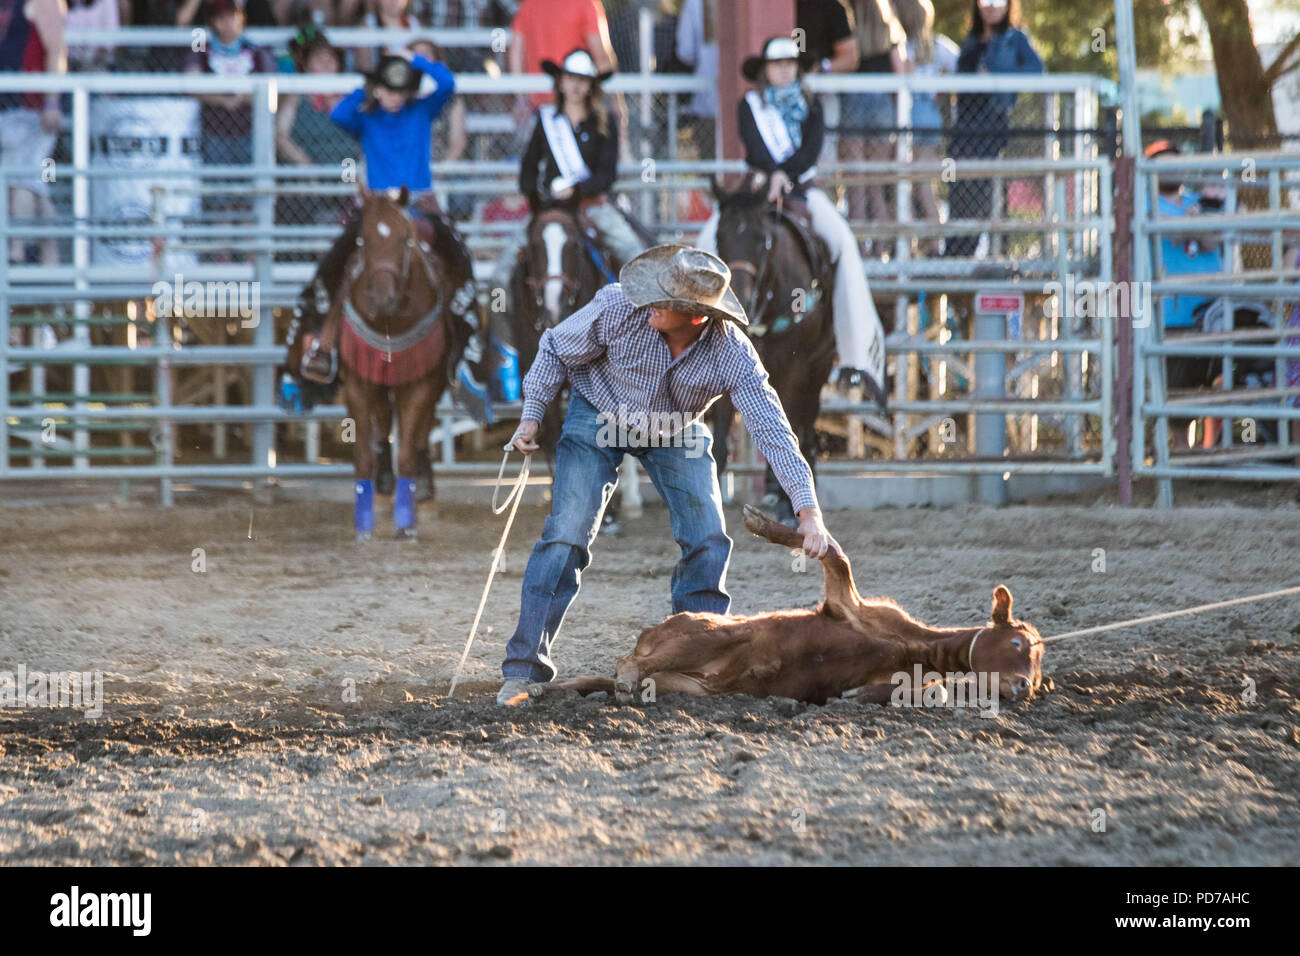 A cowboy successfully captures a calf during the tie-down competition at the 2018 Deschutes County Fair Rodeo. Stock Photo